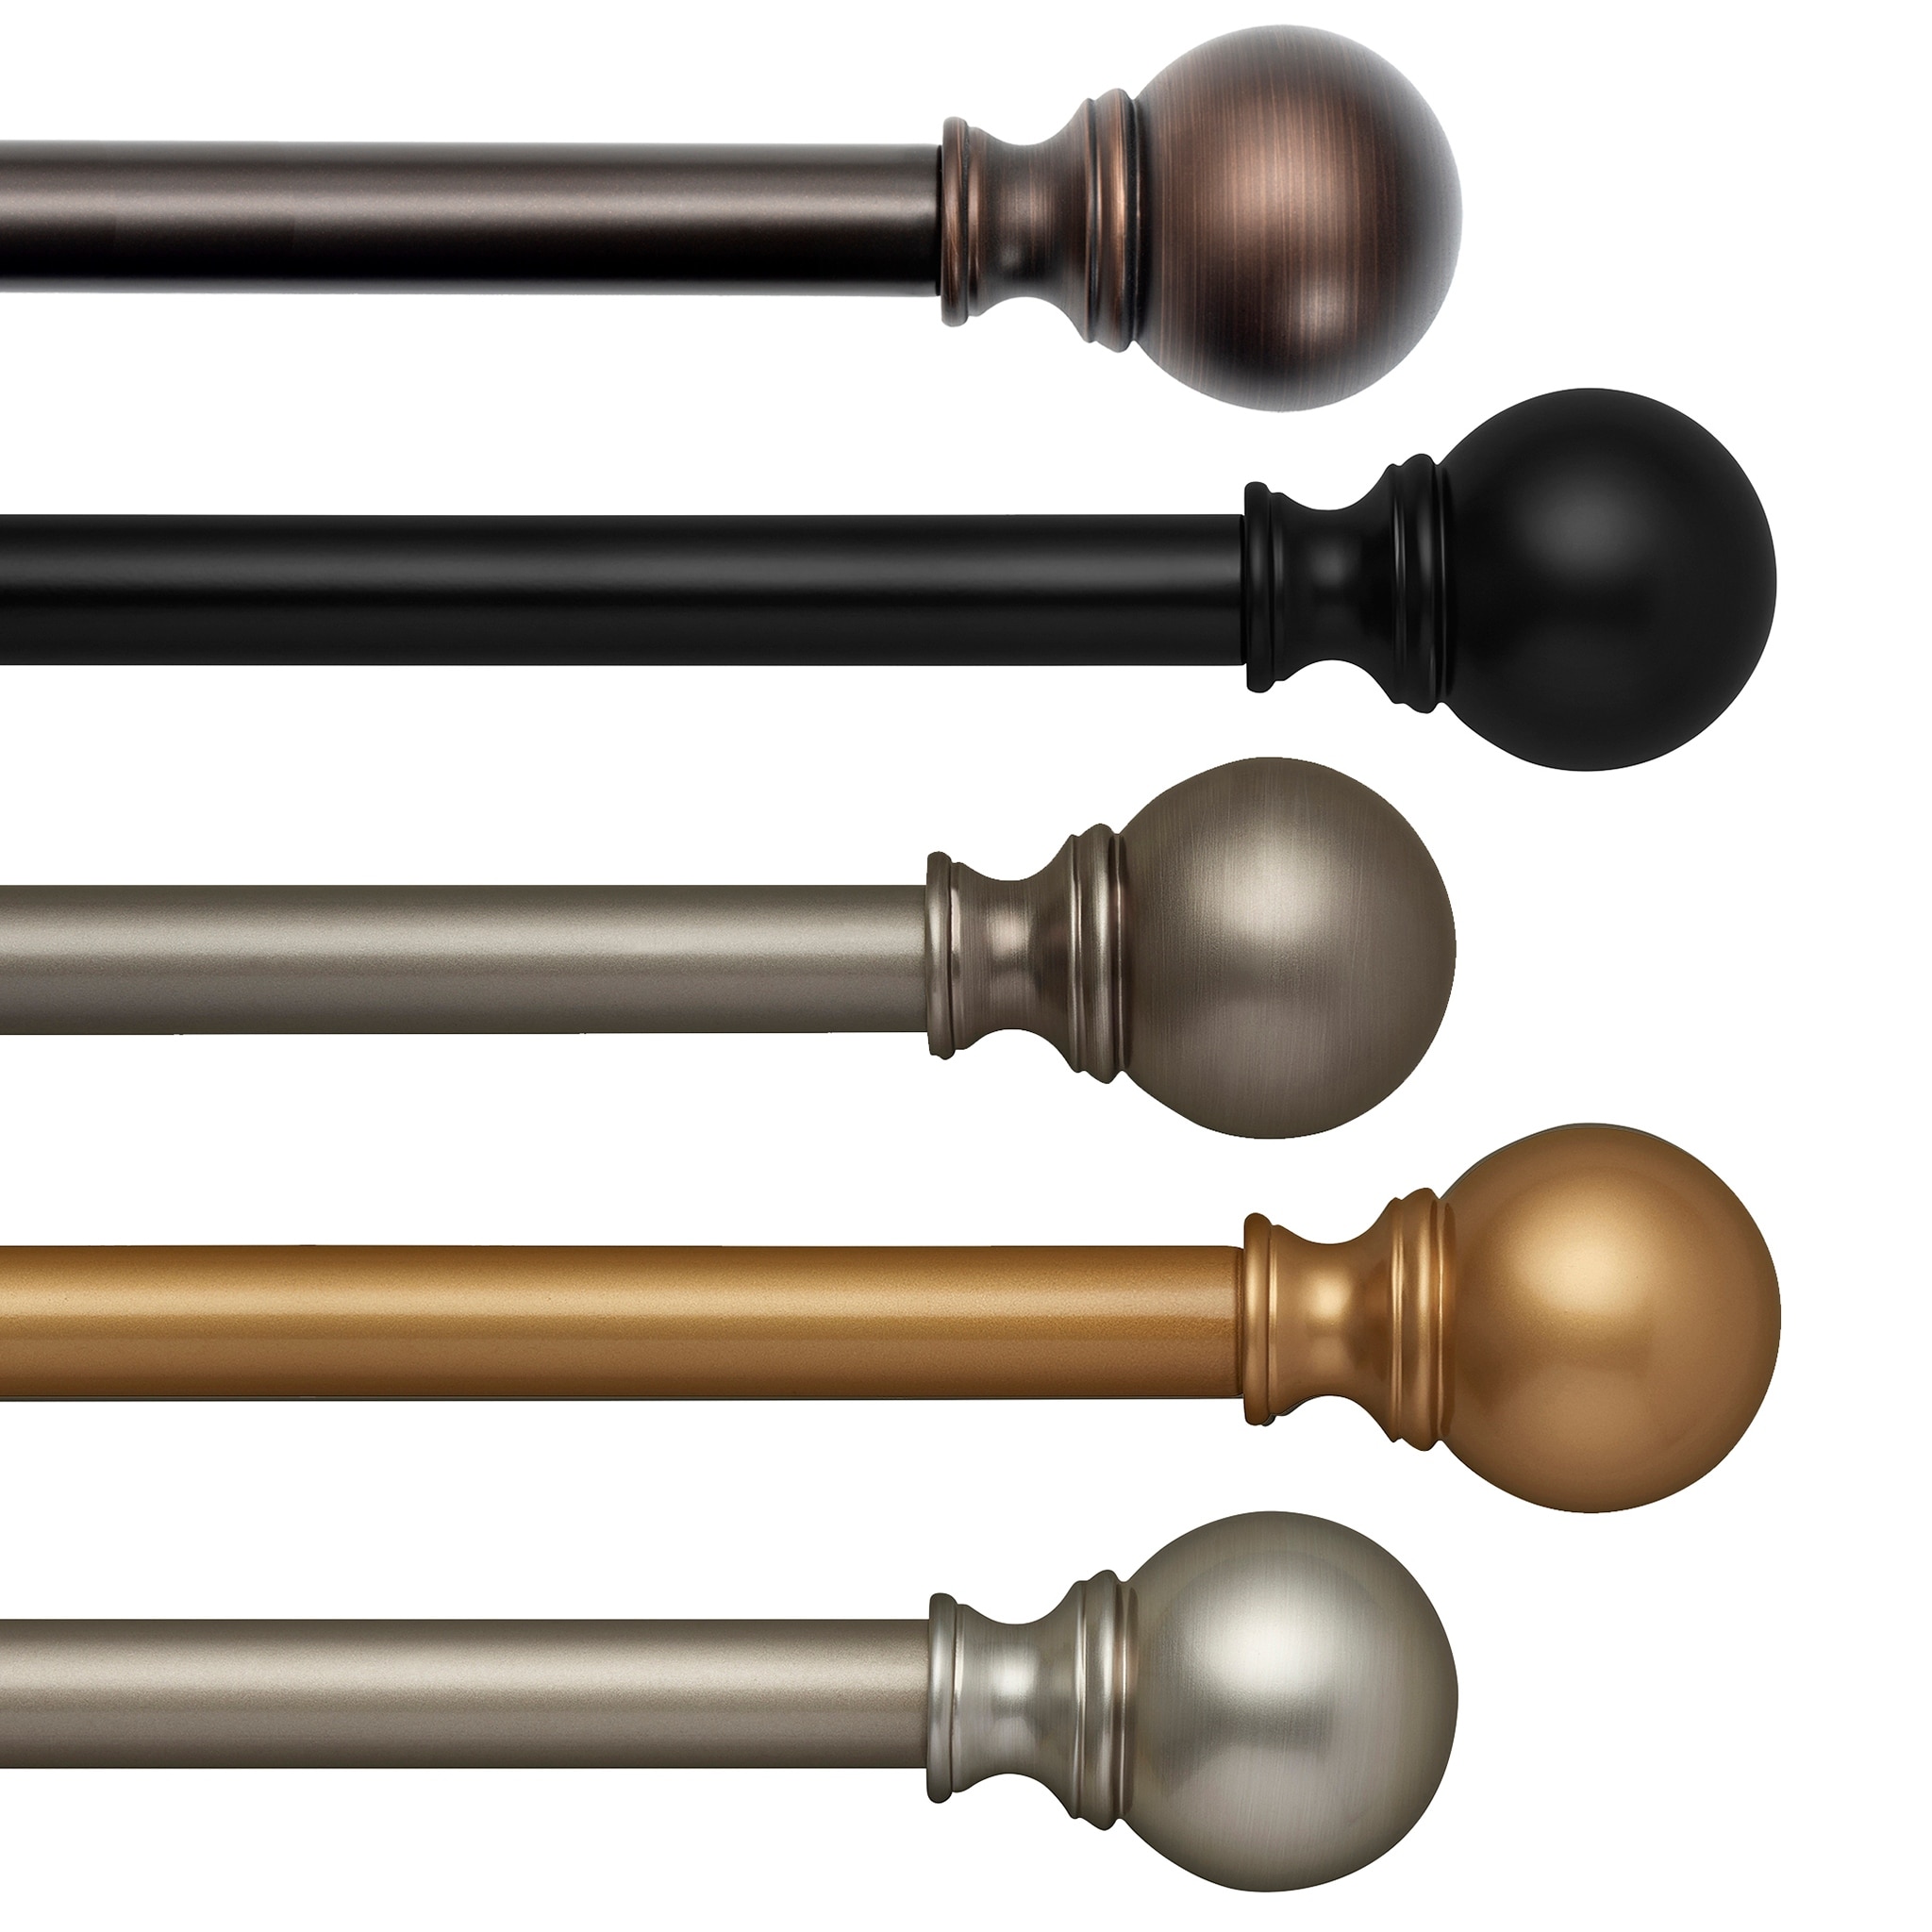 Curtain Rods and Hardware - Bed Bath & Beyond